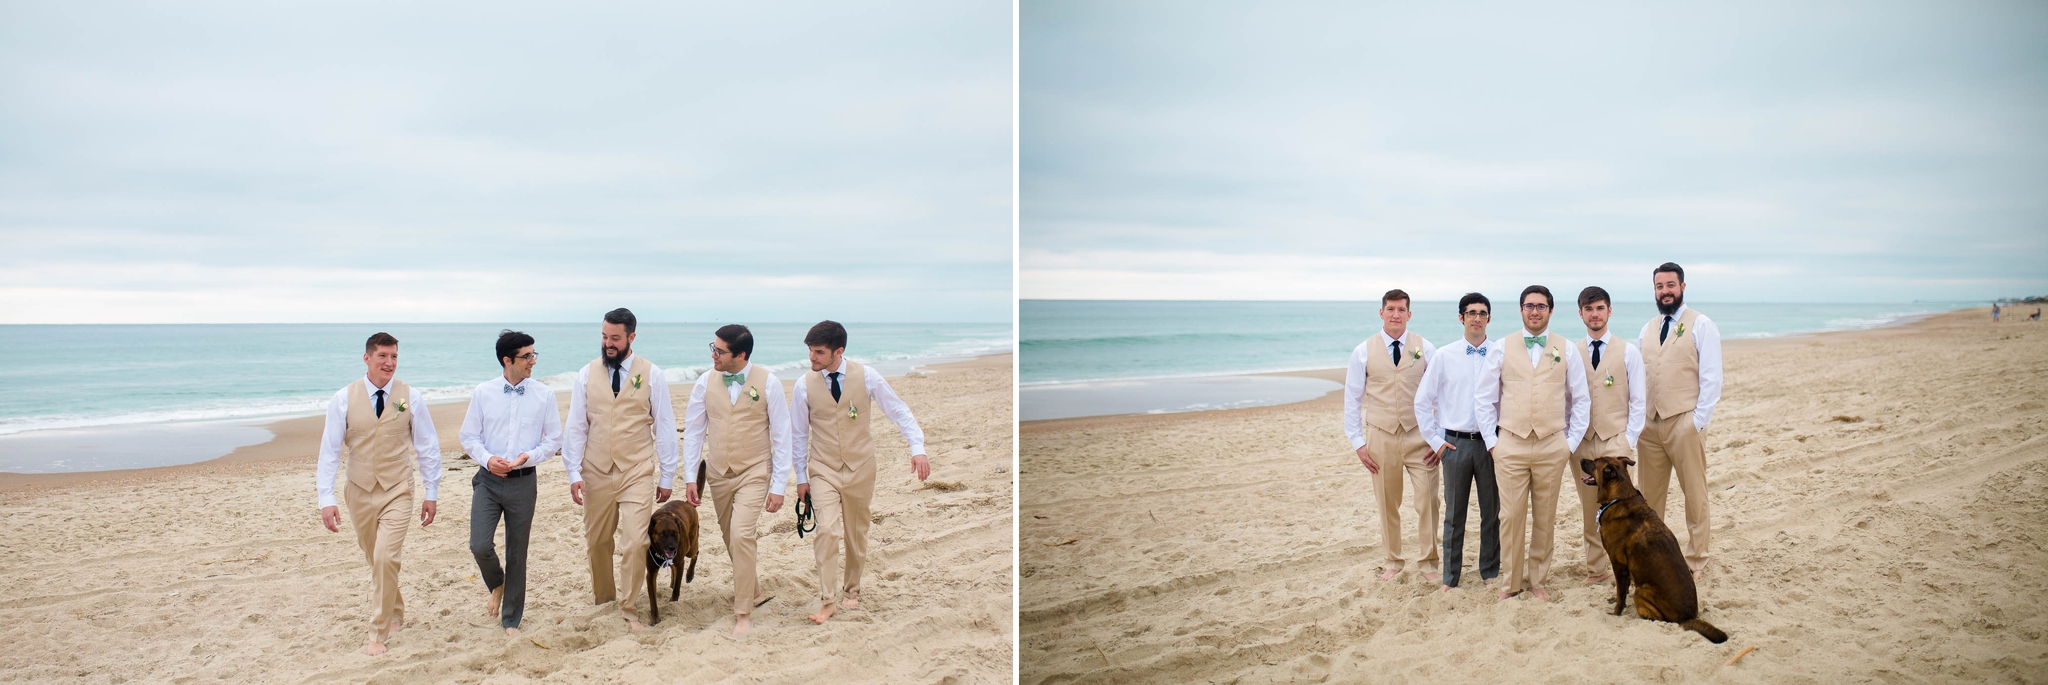 Rena + Aaron Wedding Photography at 1 Impossible Dream in Emerald Isle North Carolina - Outer Banks Photographer 